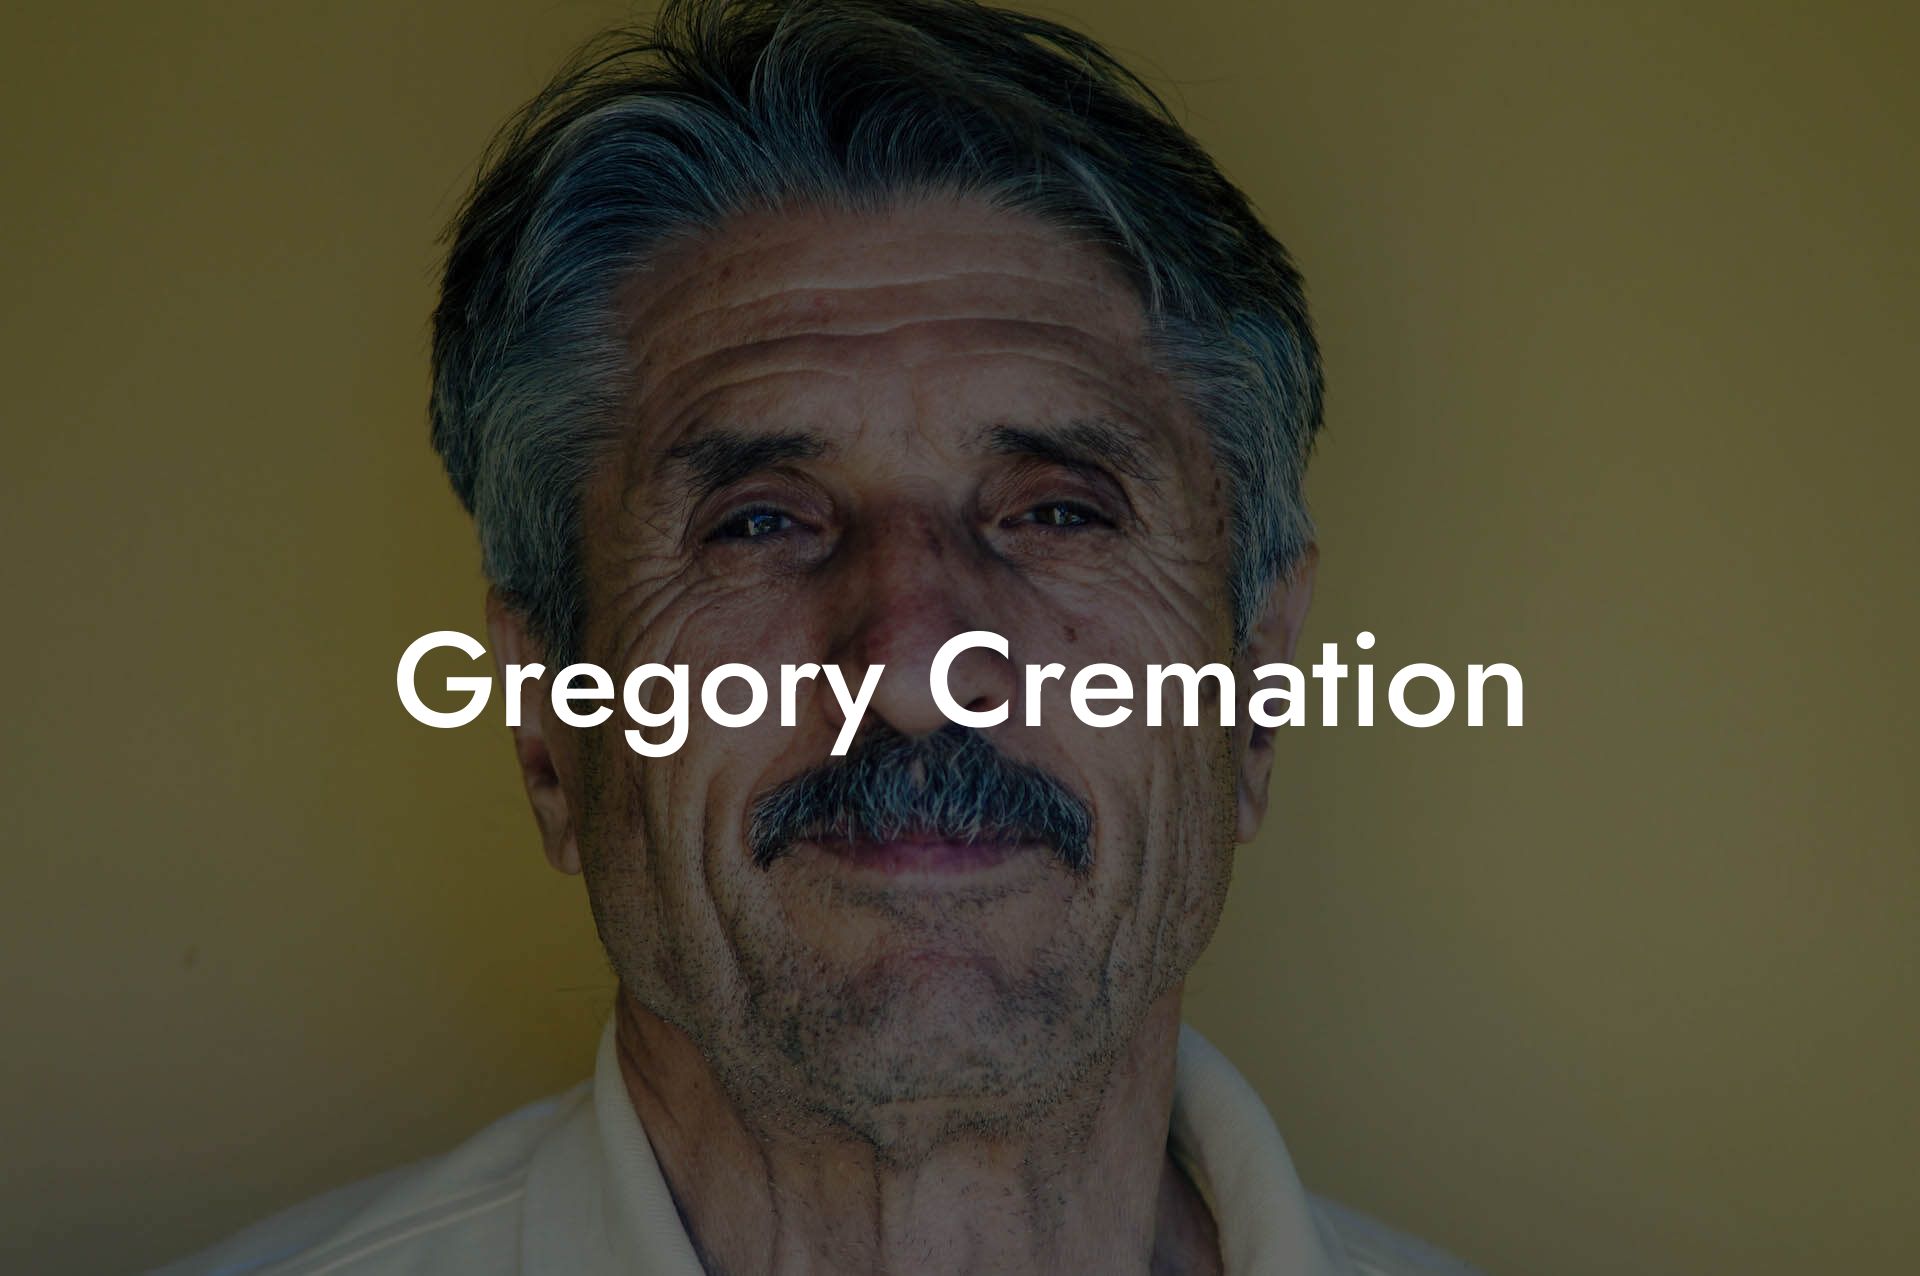 Gregory Cremation